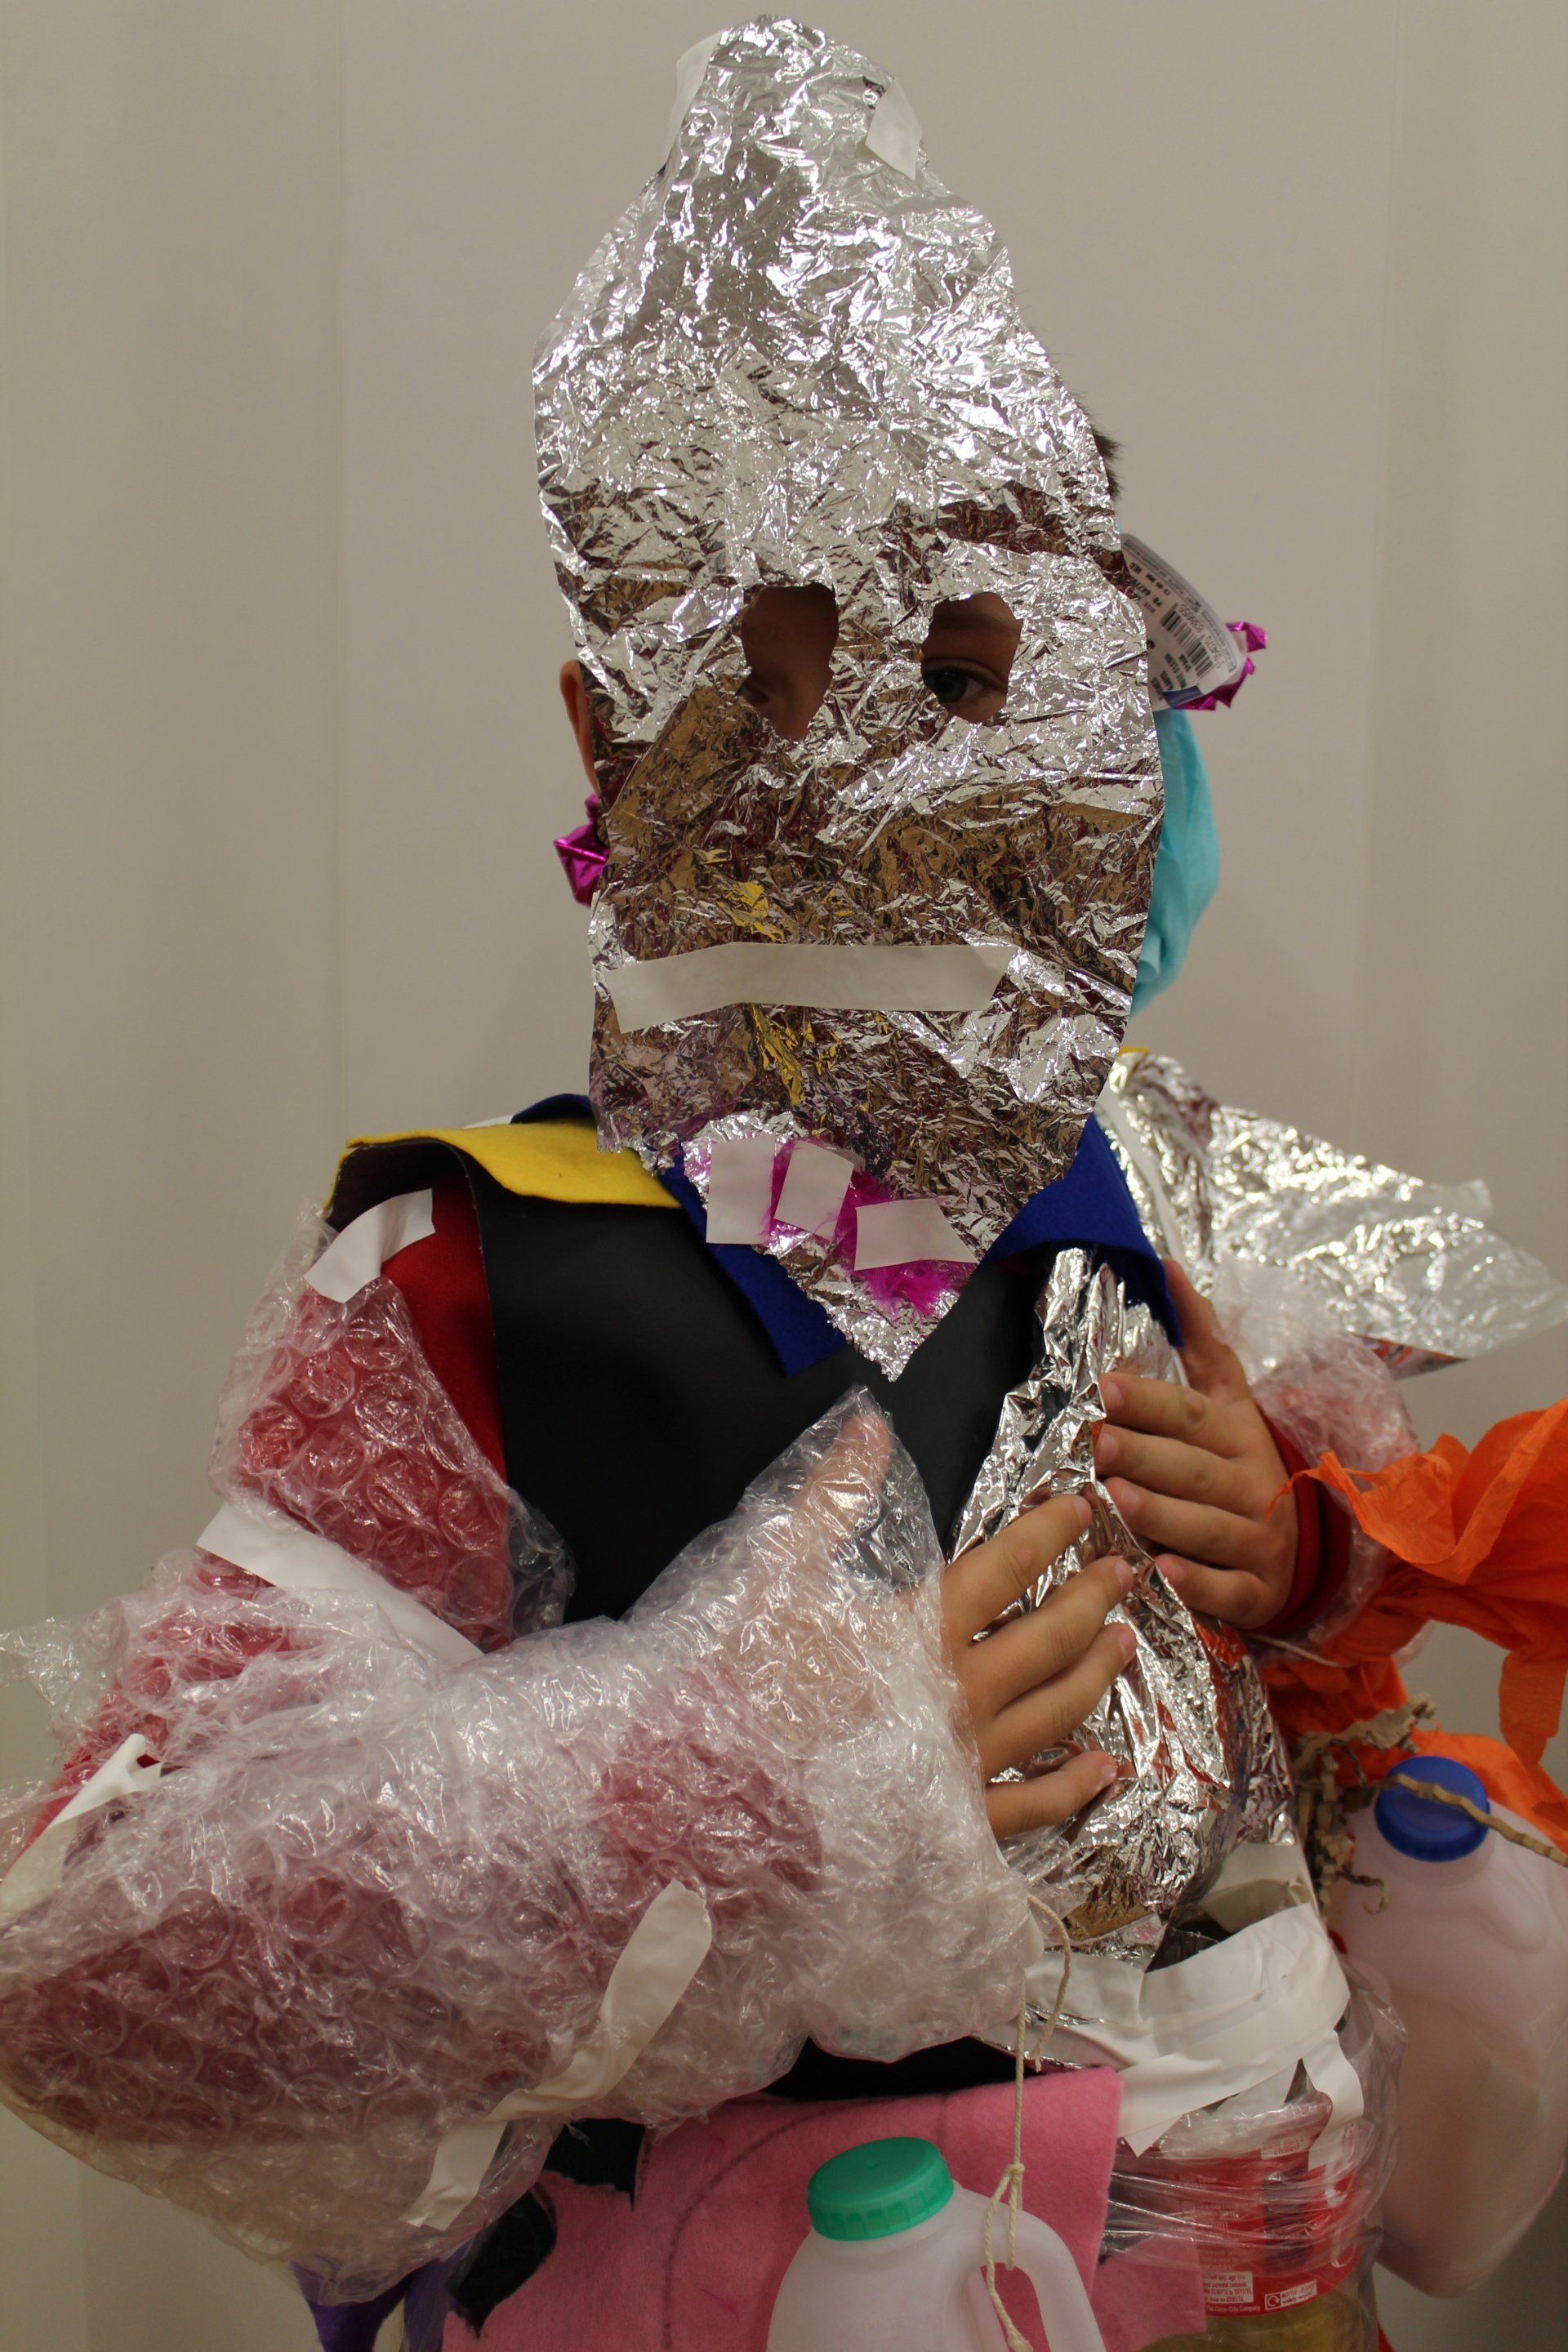 a person is wrapped in aluminum foil and plastic wrap